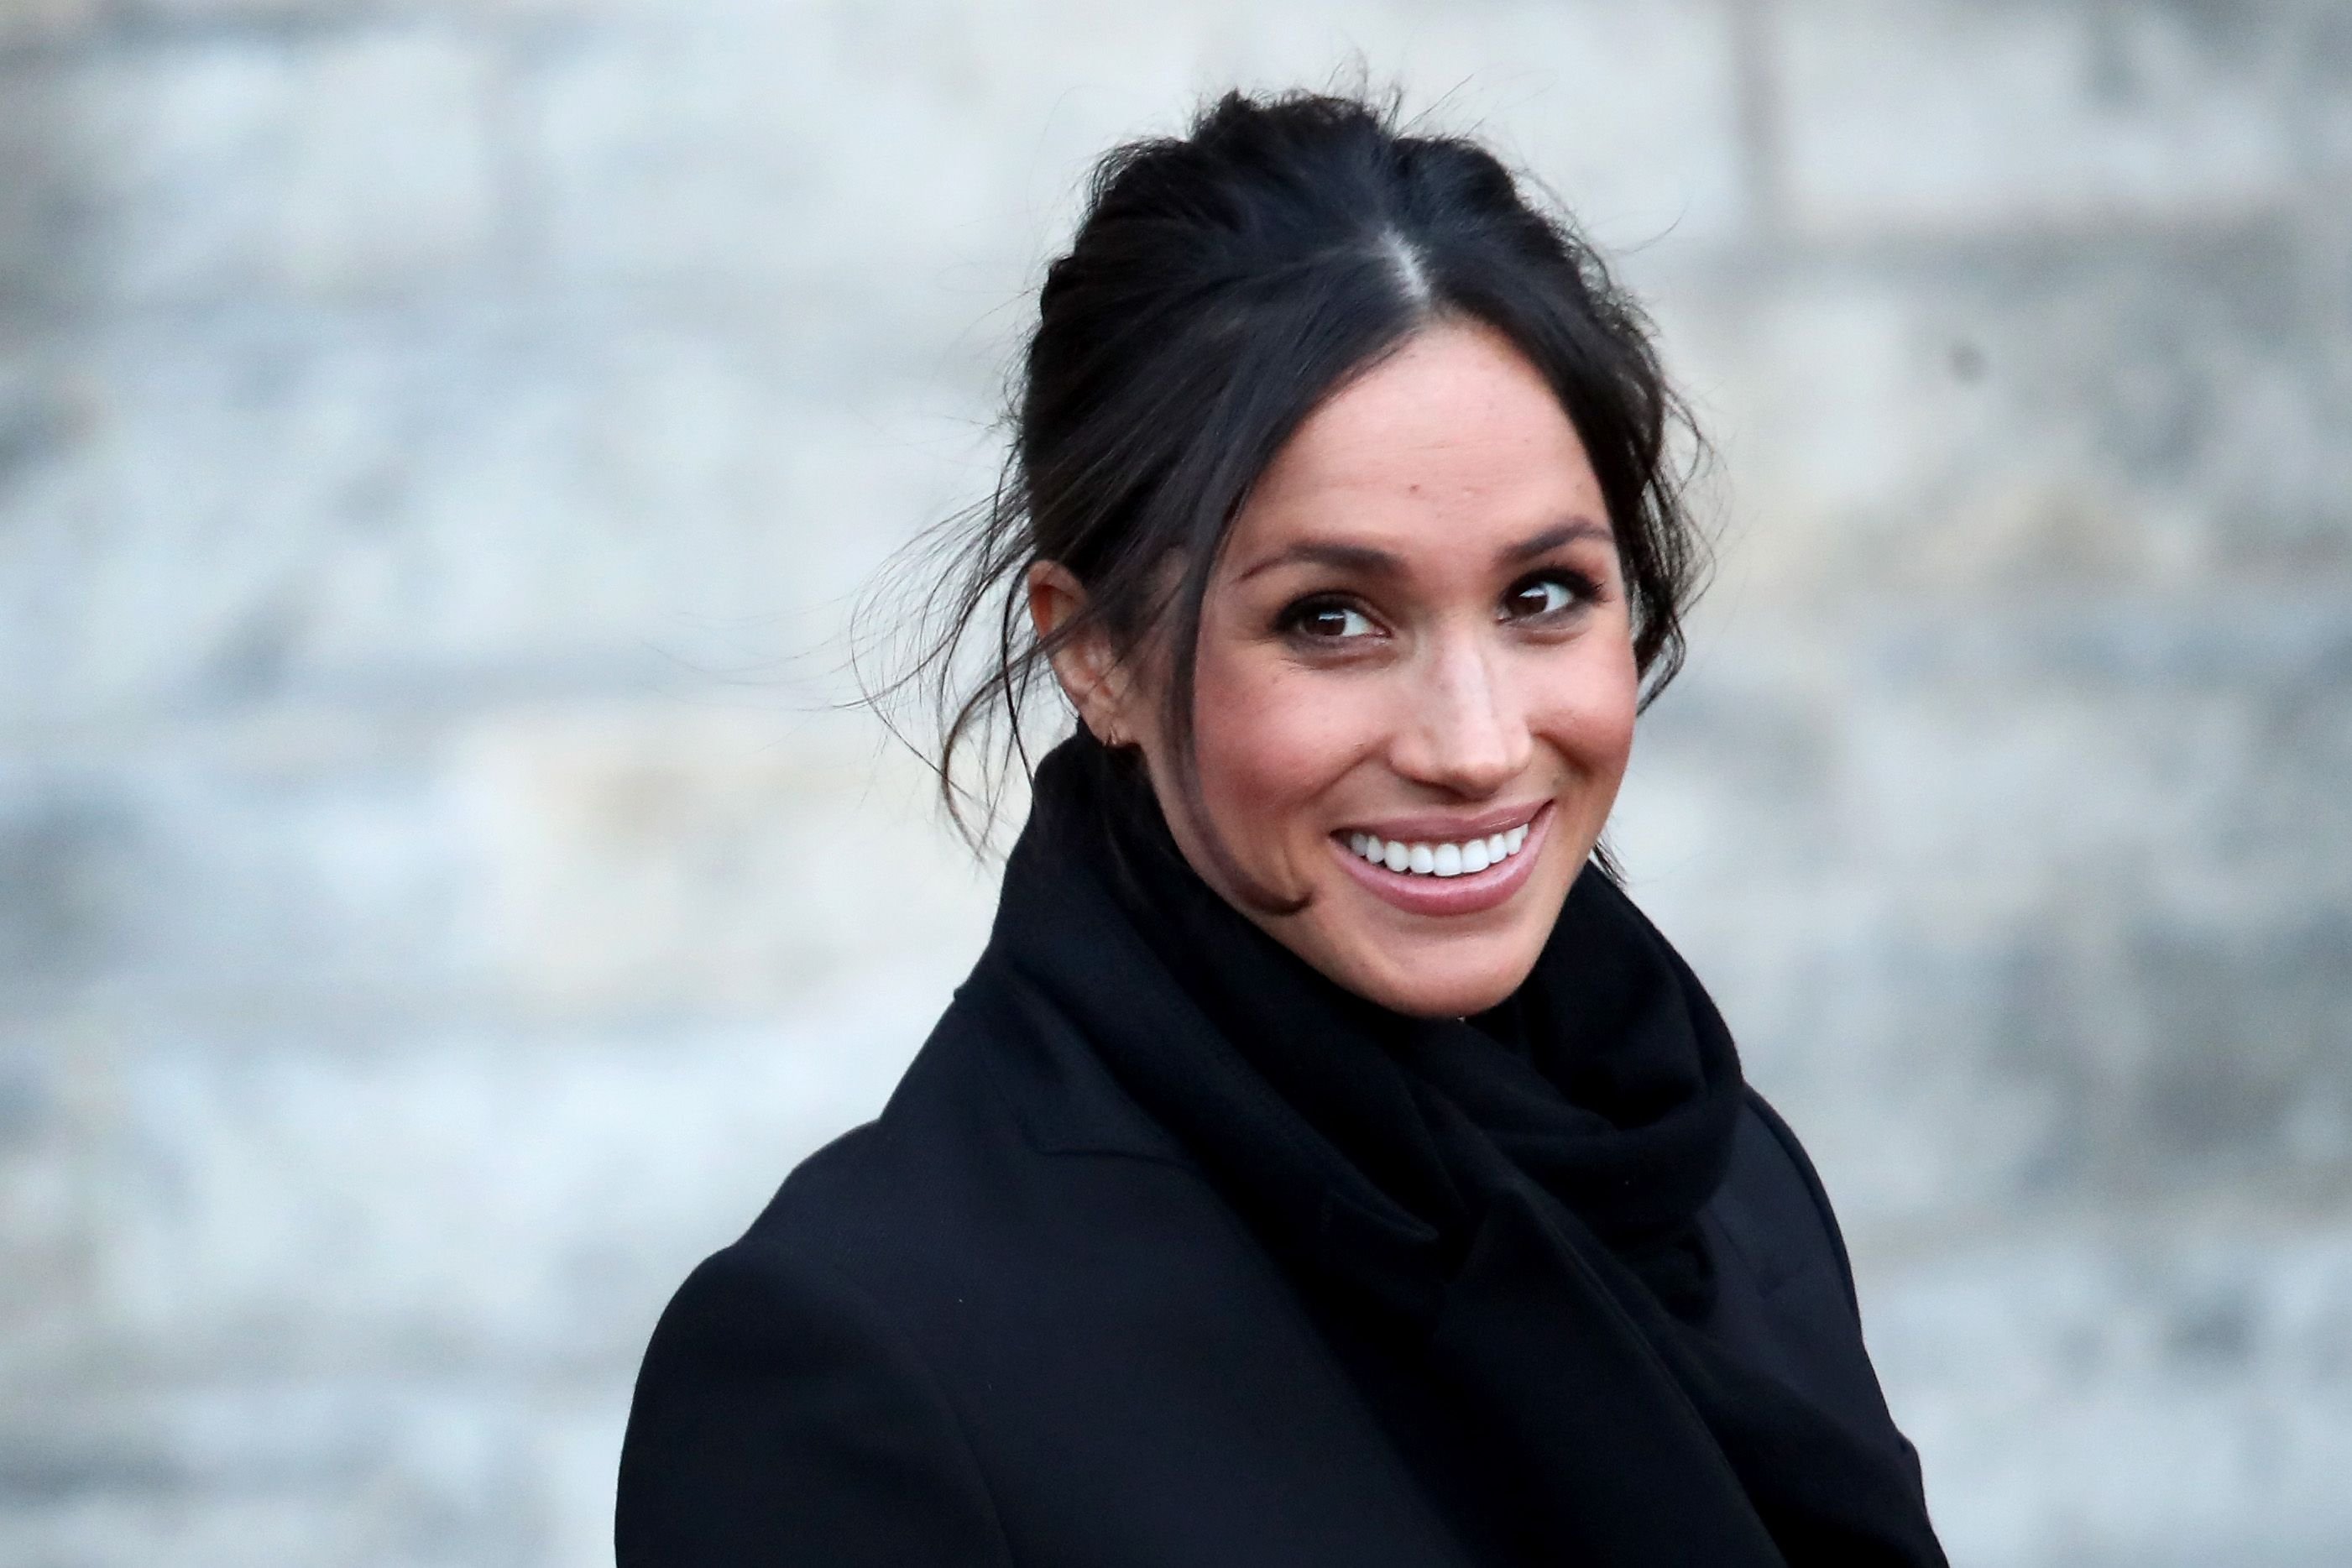 Meghan Markle departs from a walkabout at Cardiff Castle on January 18, 2018, in Cardiff, Wales | Photo: Chris Jackson/Getty Images